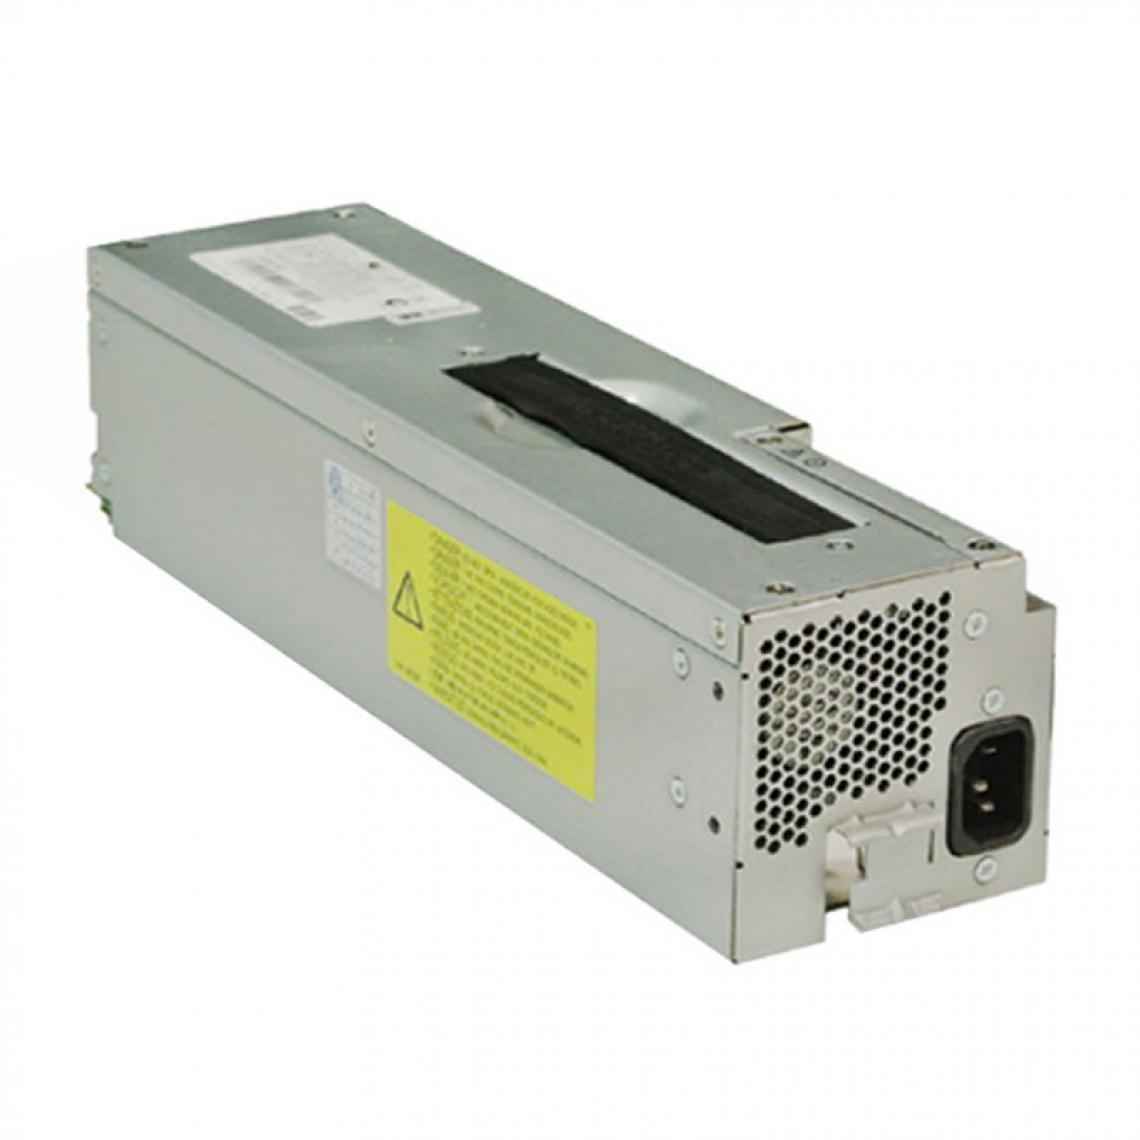 Dell - Alimentation Dell NPS-330BB A 330W 00284T 100-240V Power Supply PowerEdge 2450 - Alimentation modulaire